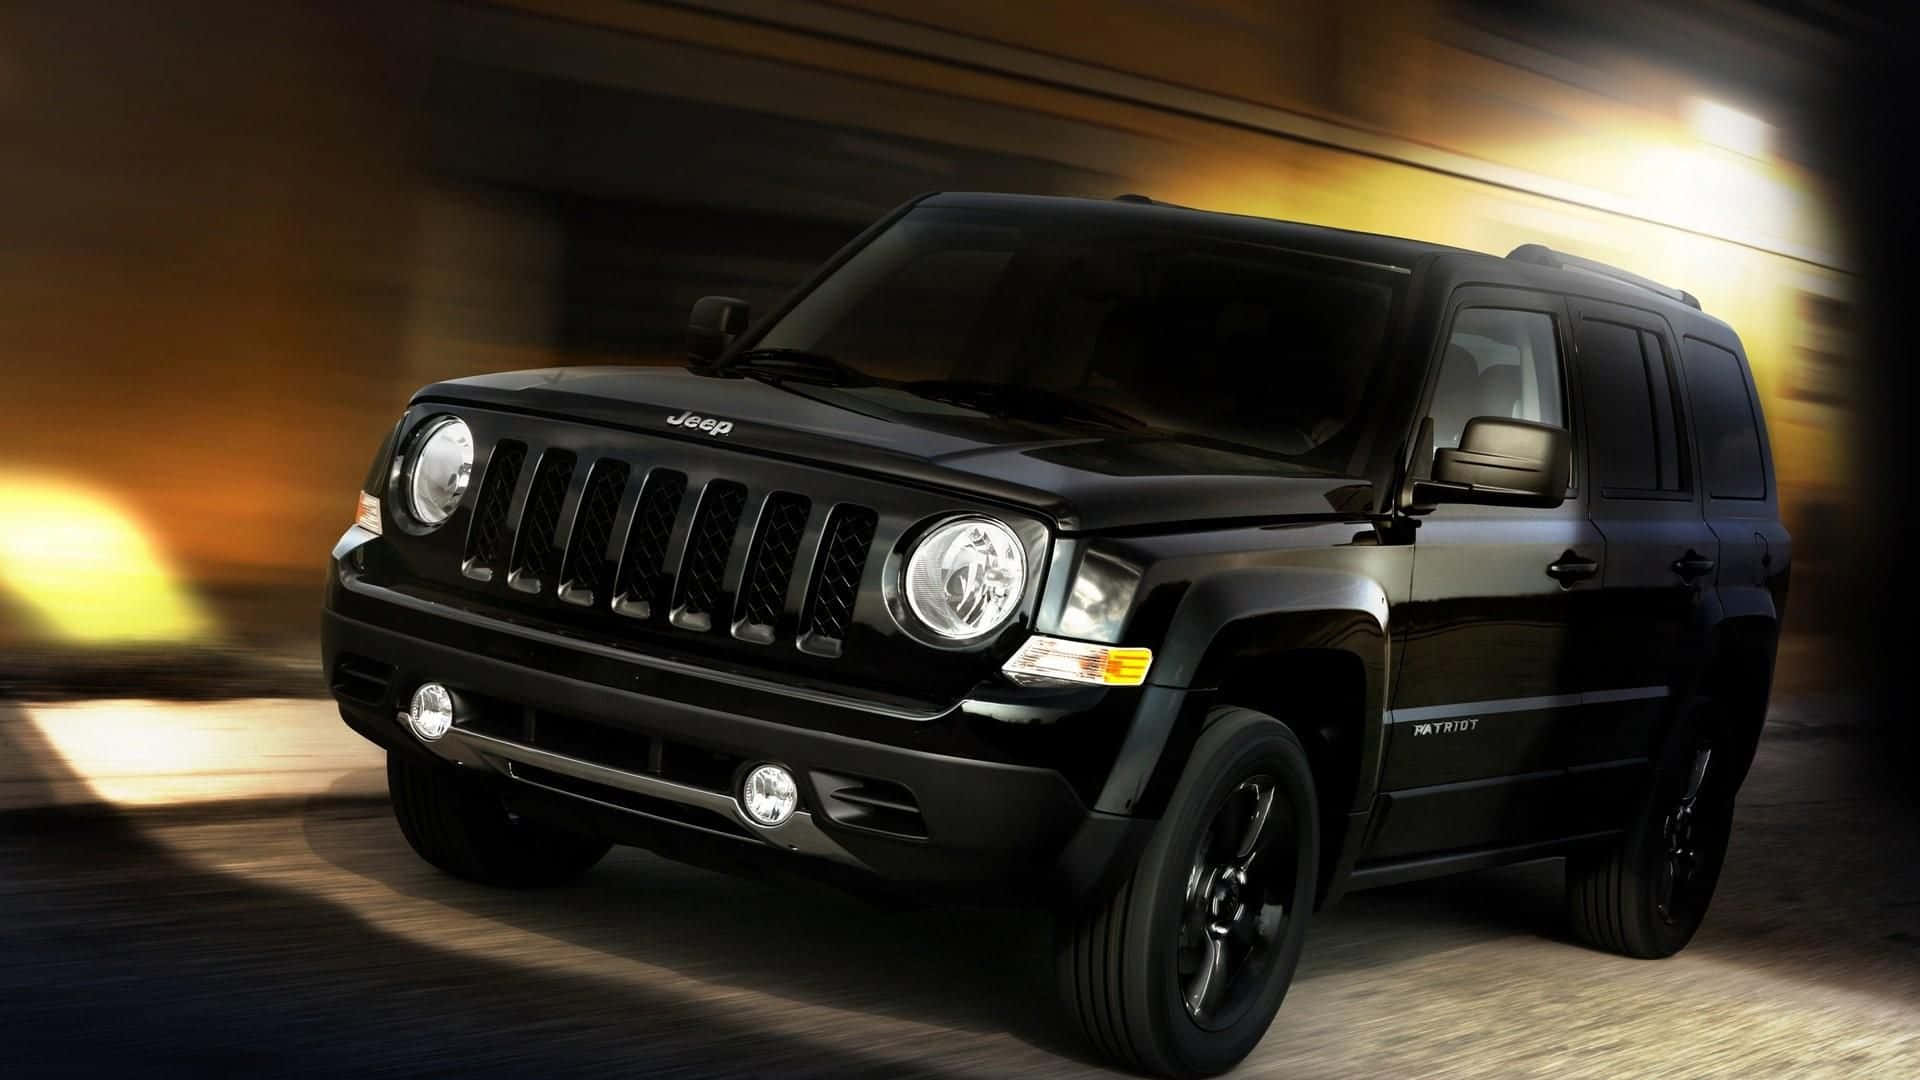 Rugged Jeep Patriot on an off-road adventure Wallpaper